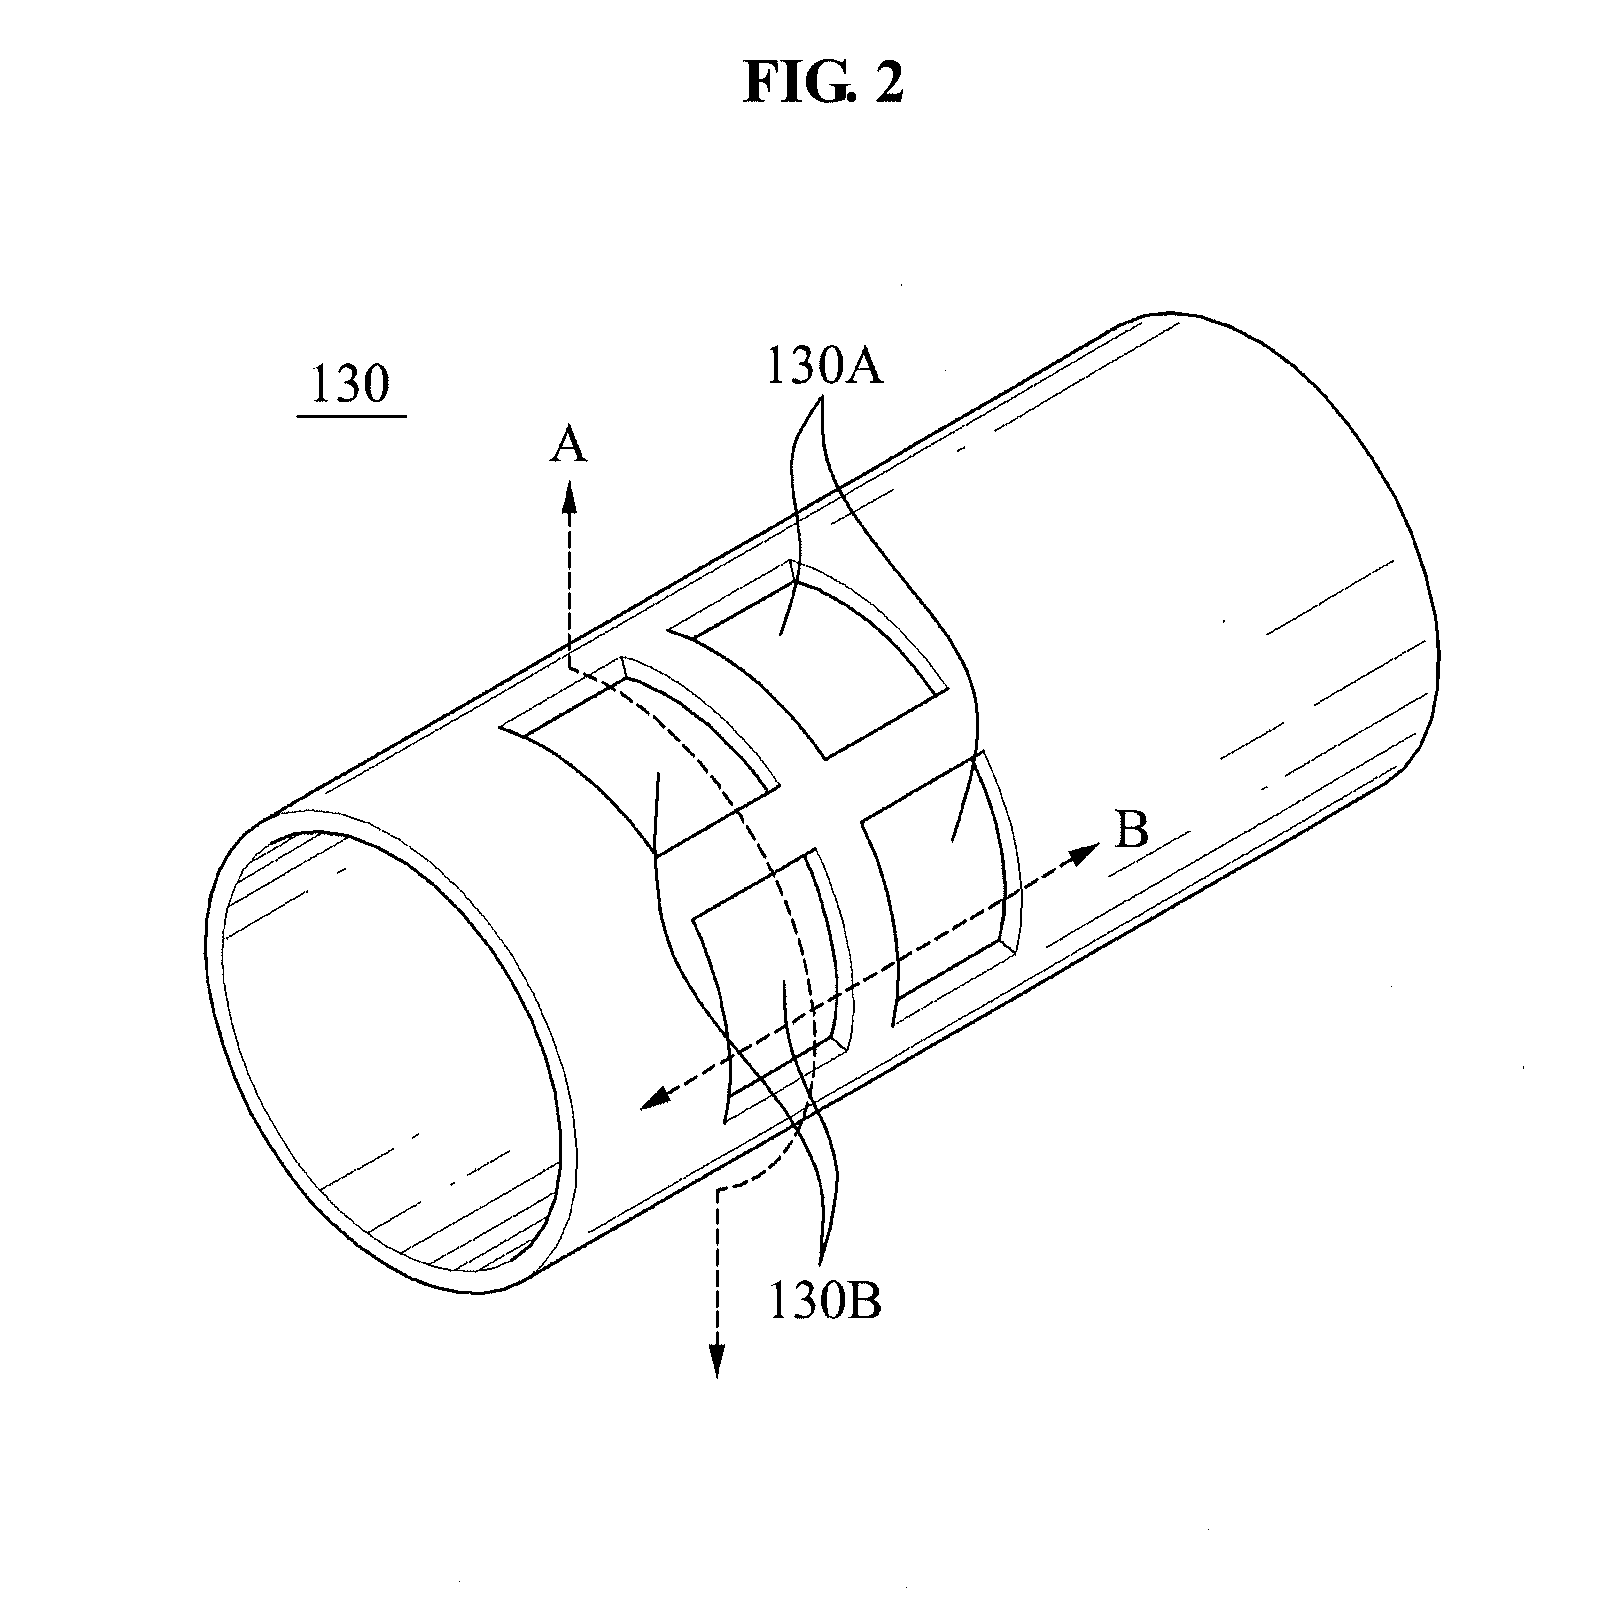 Proximity sensor used by an operation robot and method of operating the proximity sensor